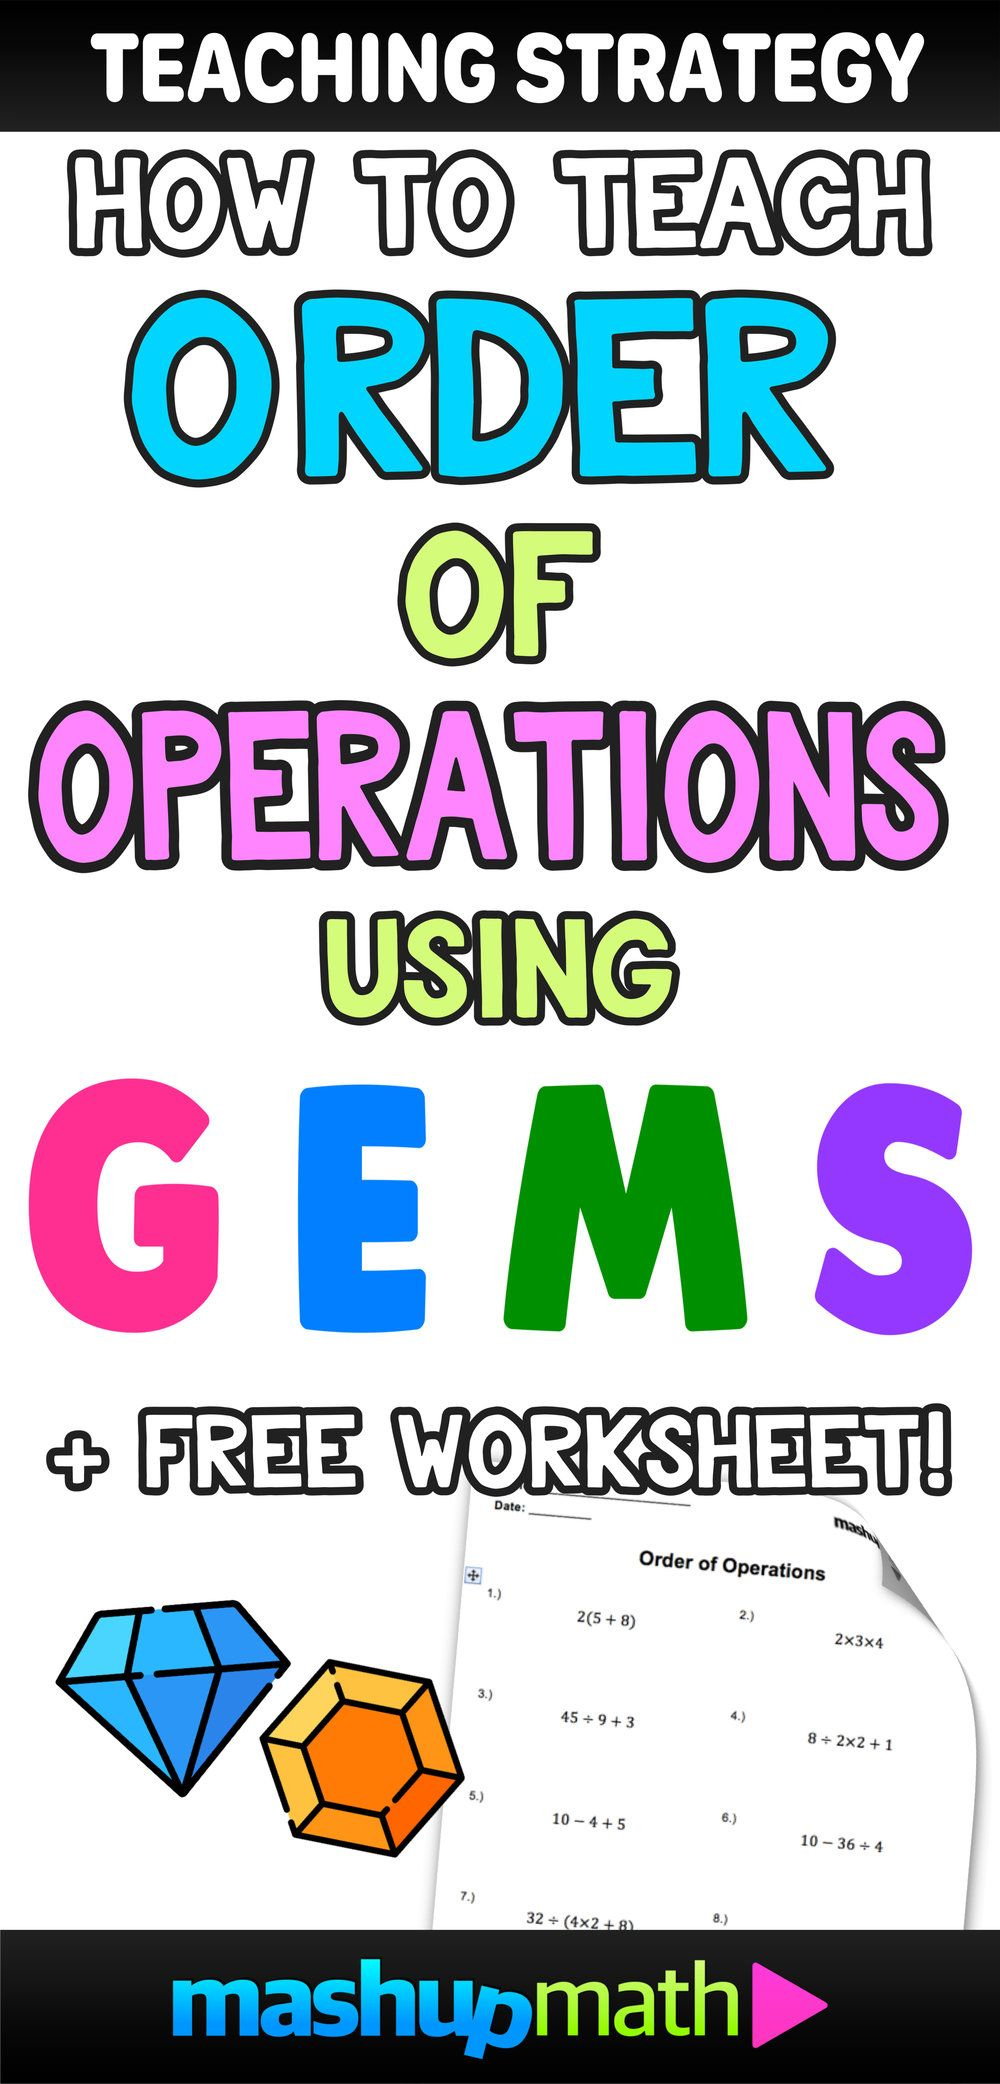 Why Is GEMS The Best Way To Teach Order Of Operations Order Of 